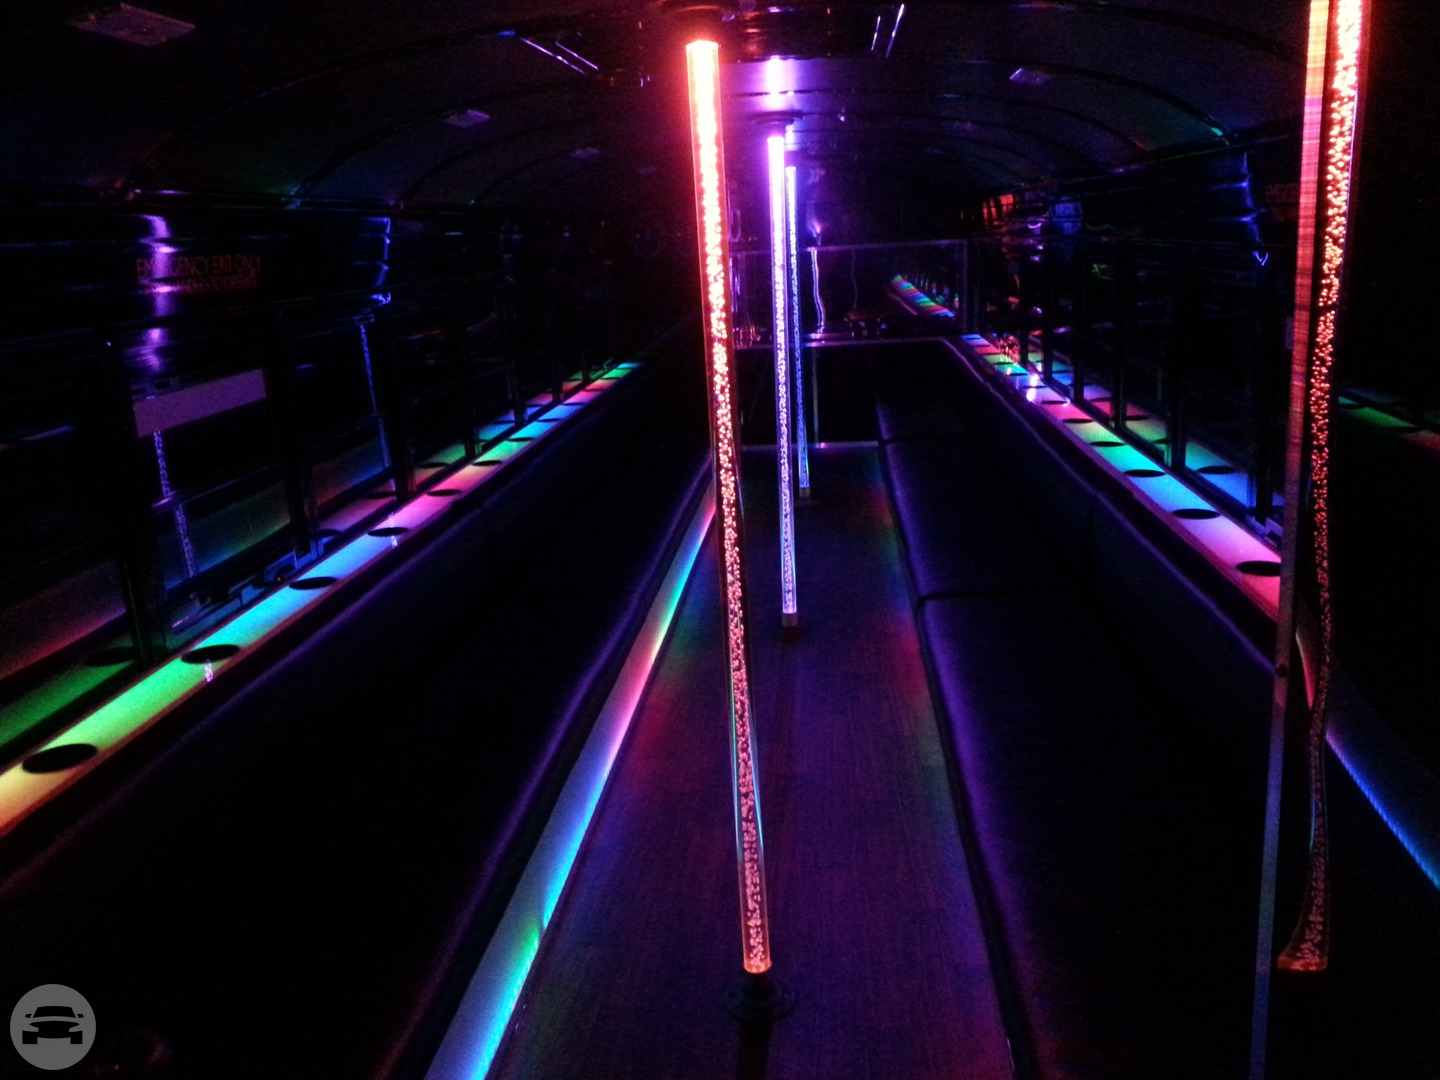 THE BLACK JACK PARTY BUS LIMO
Party Limo Bus /
Minneapolis, MN

 / Hourly $0.00
